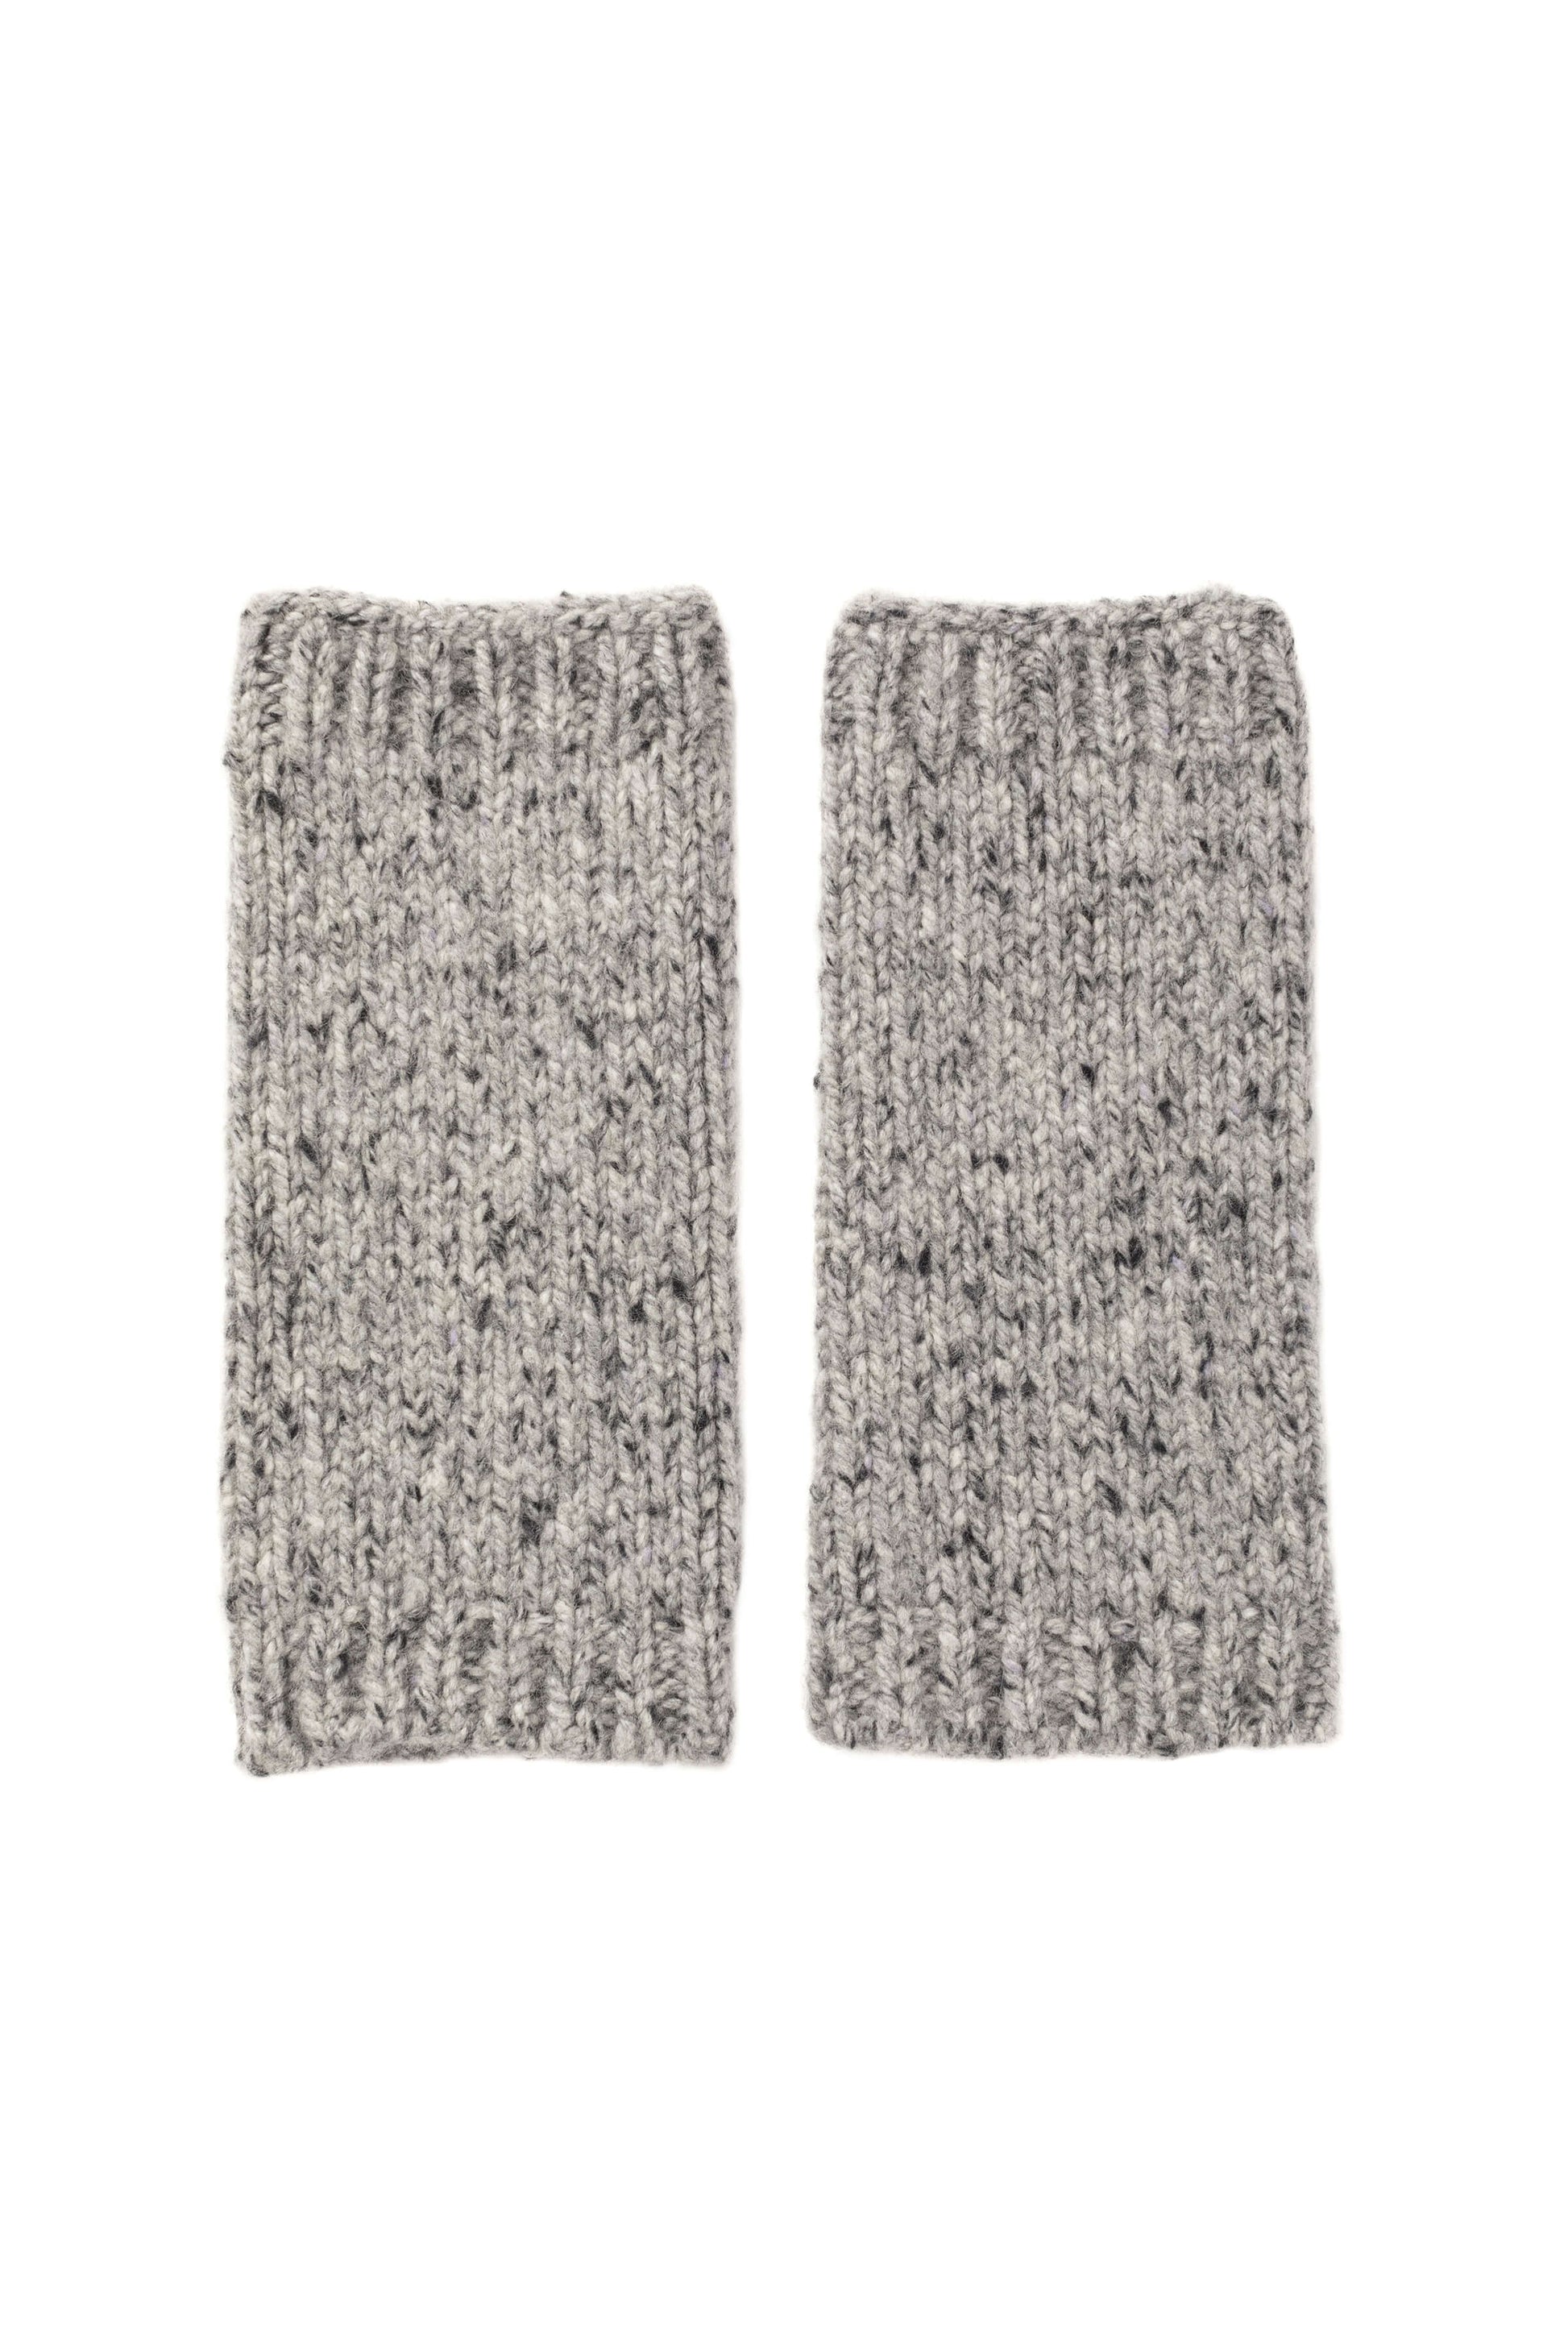 Johnstons of Elgin AW24 Knitted Accessory Light Grey  Donegal Cashmere Wrist Warmers HAC03255HA4150ONE